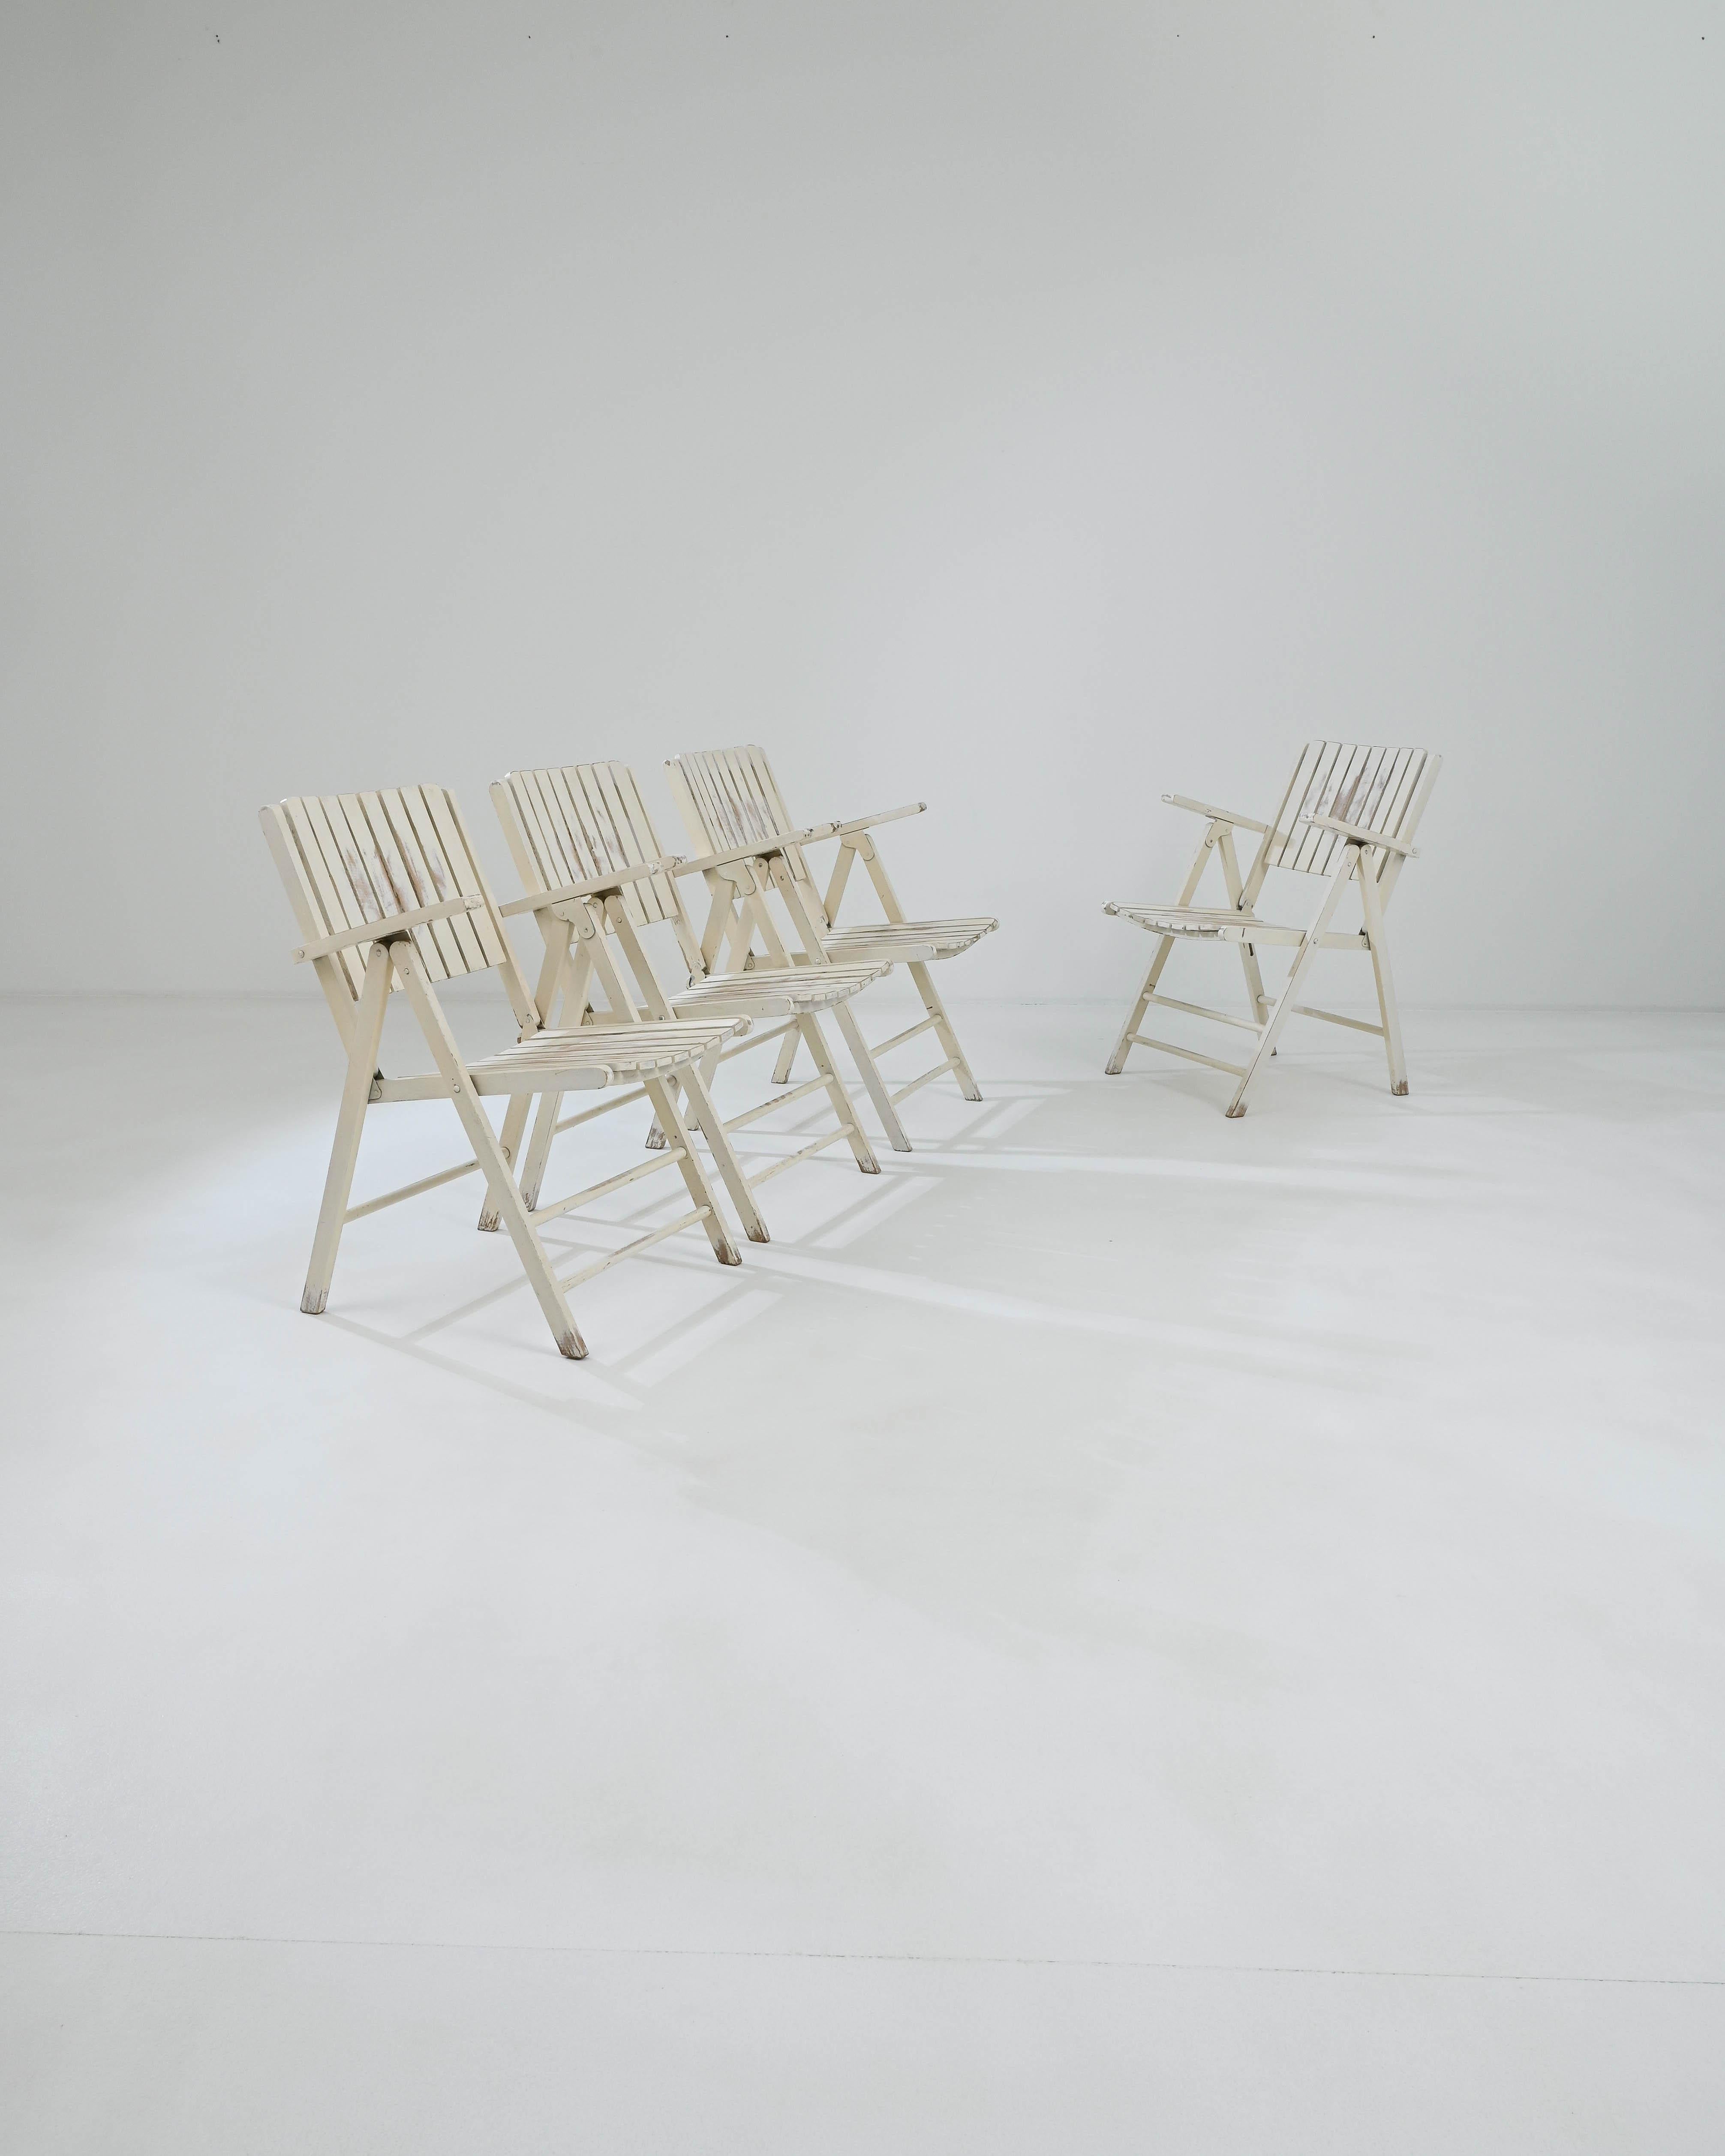 A set of wooden folding outdoor chairs created in 20th century France. Collapsible lawn chairs clad in a pleasing off-white tone, these antique chairs communicate a lovely matured cheer. Composed of wooden slats which line the backs and seats, these